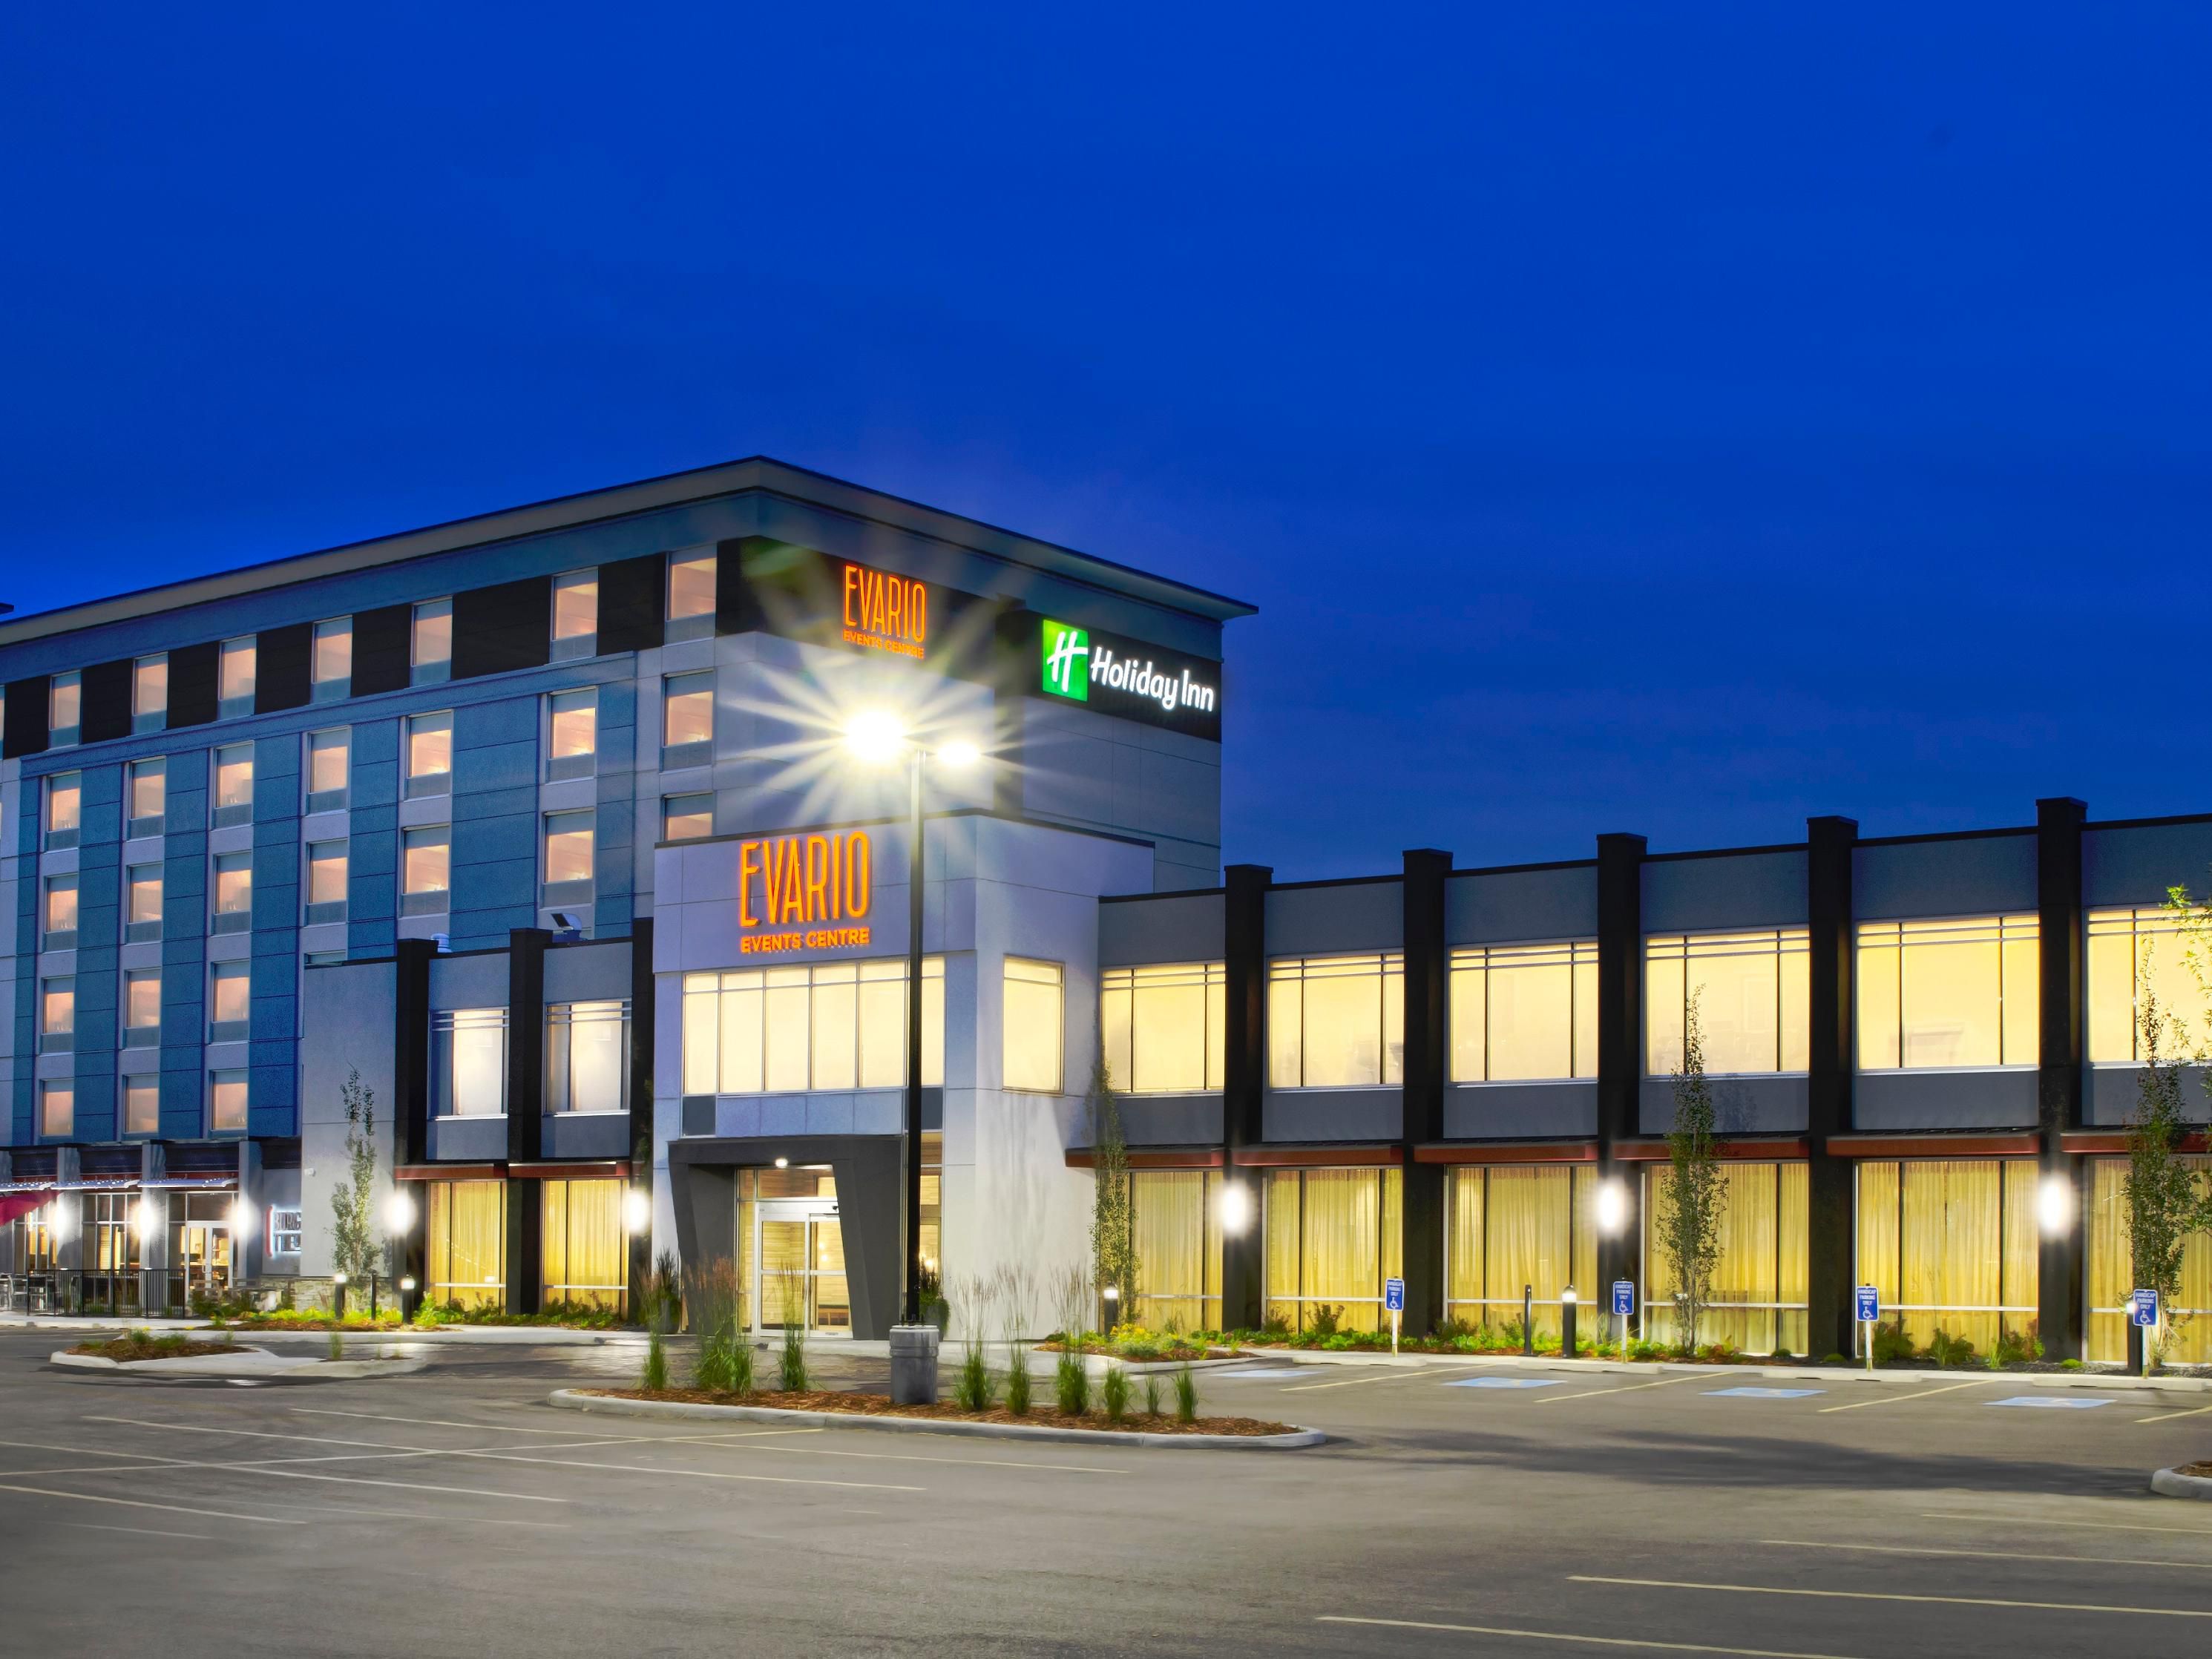 The Holiday Inn Edmonton South- Evario Events offers all overnight guests as well as guests attending a meeting or event at the Evario Centre. 